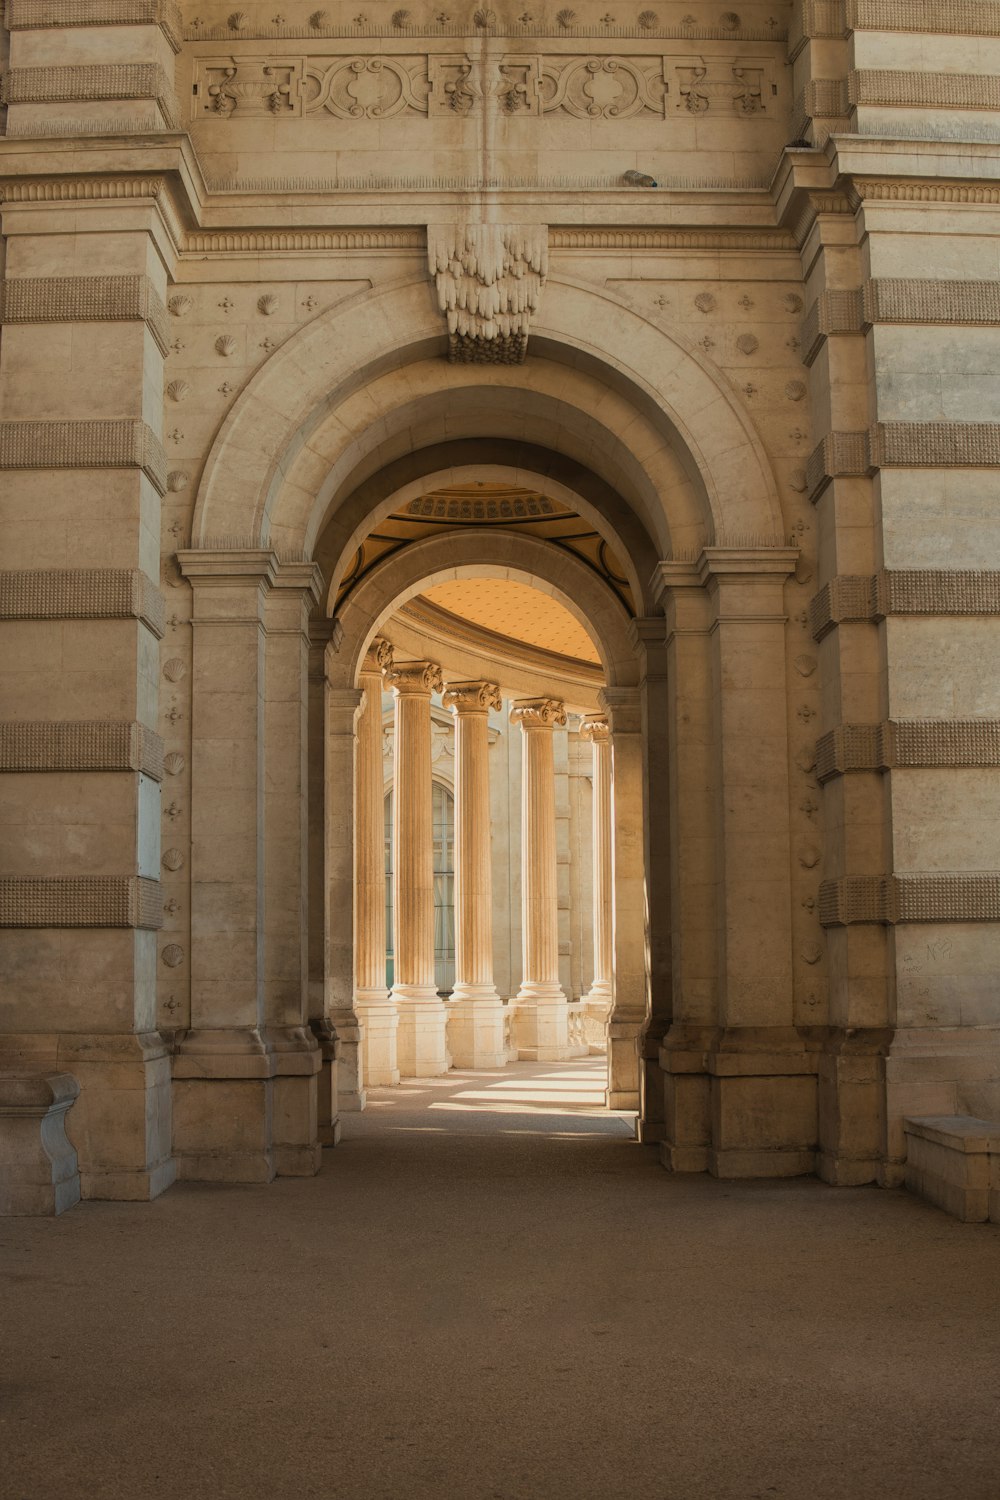 an archway leading into a building with columns